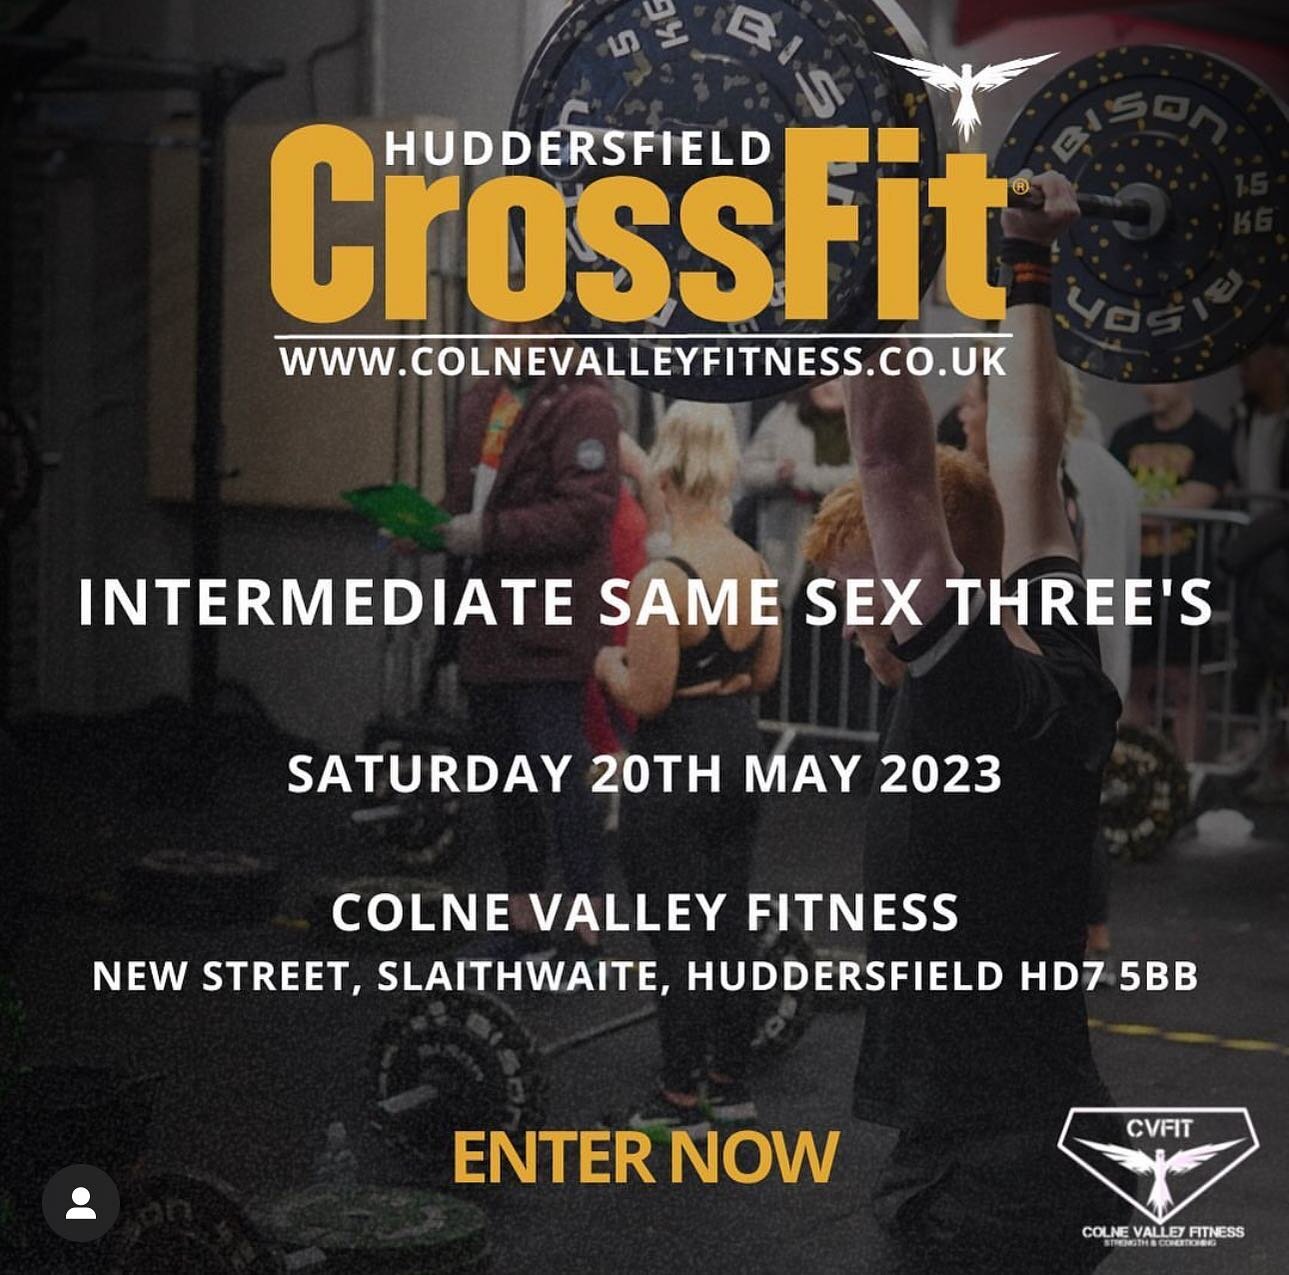 Sold Out!
This is going to be epic! Get your support crews ready!

#cvfit #slaithwaite #slawit #colnevalley #huddersfield #crossfitcompetition #crossfit #crossfitcommunity #fitness #crossfitlife #crossfitgames #crossfitgirls #wod #crossfitcomp #cross